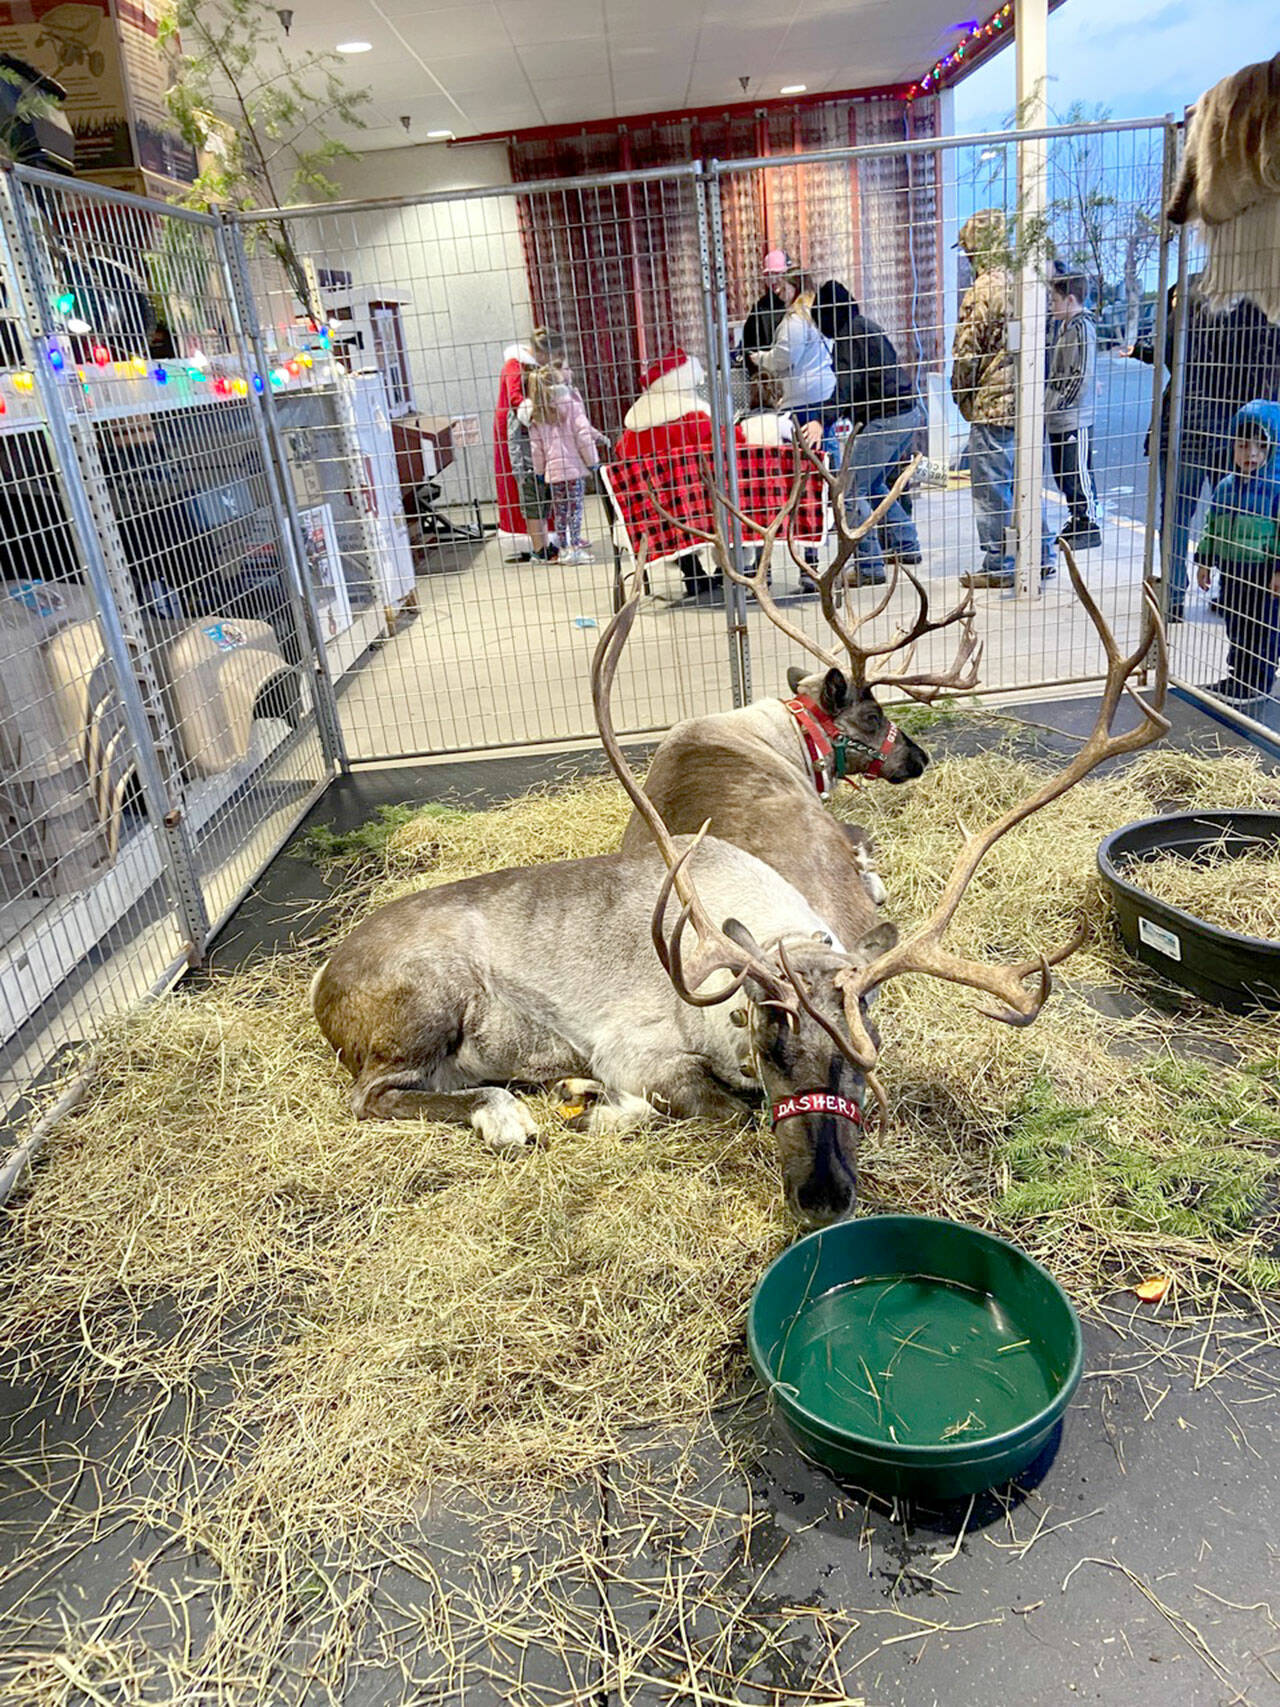 Families are invited to meet Santa and his reindeer the day after Thanksgiving at Coastal Farm & Ranch in Sequim.